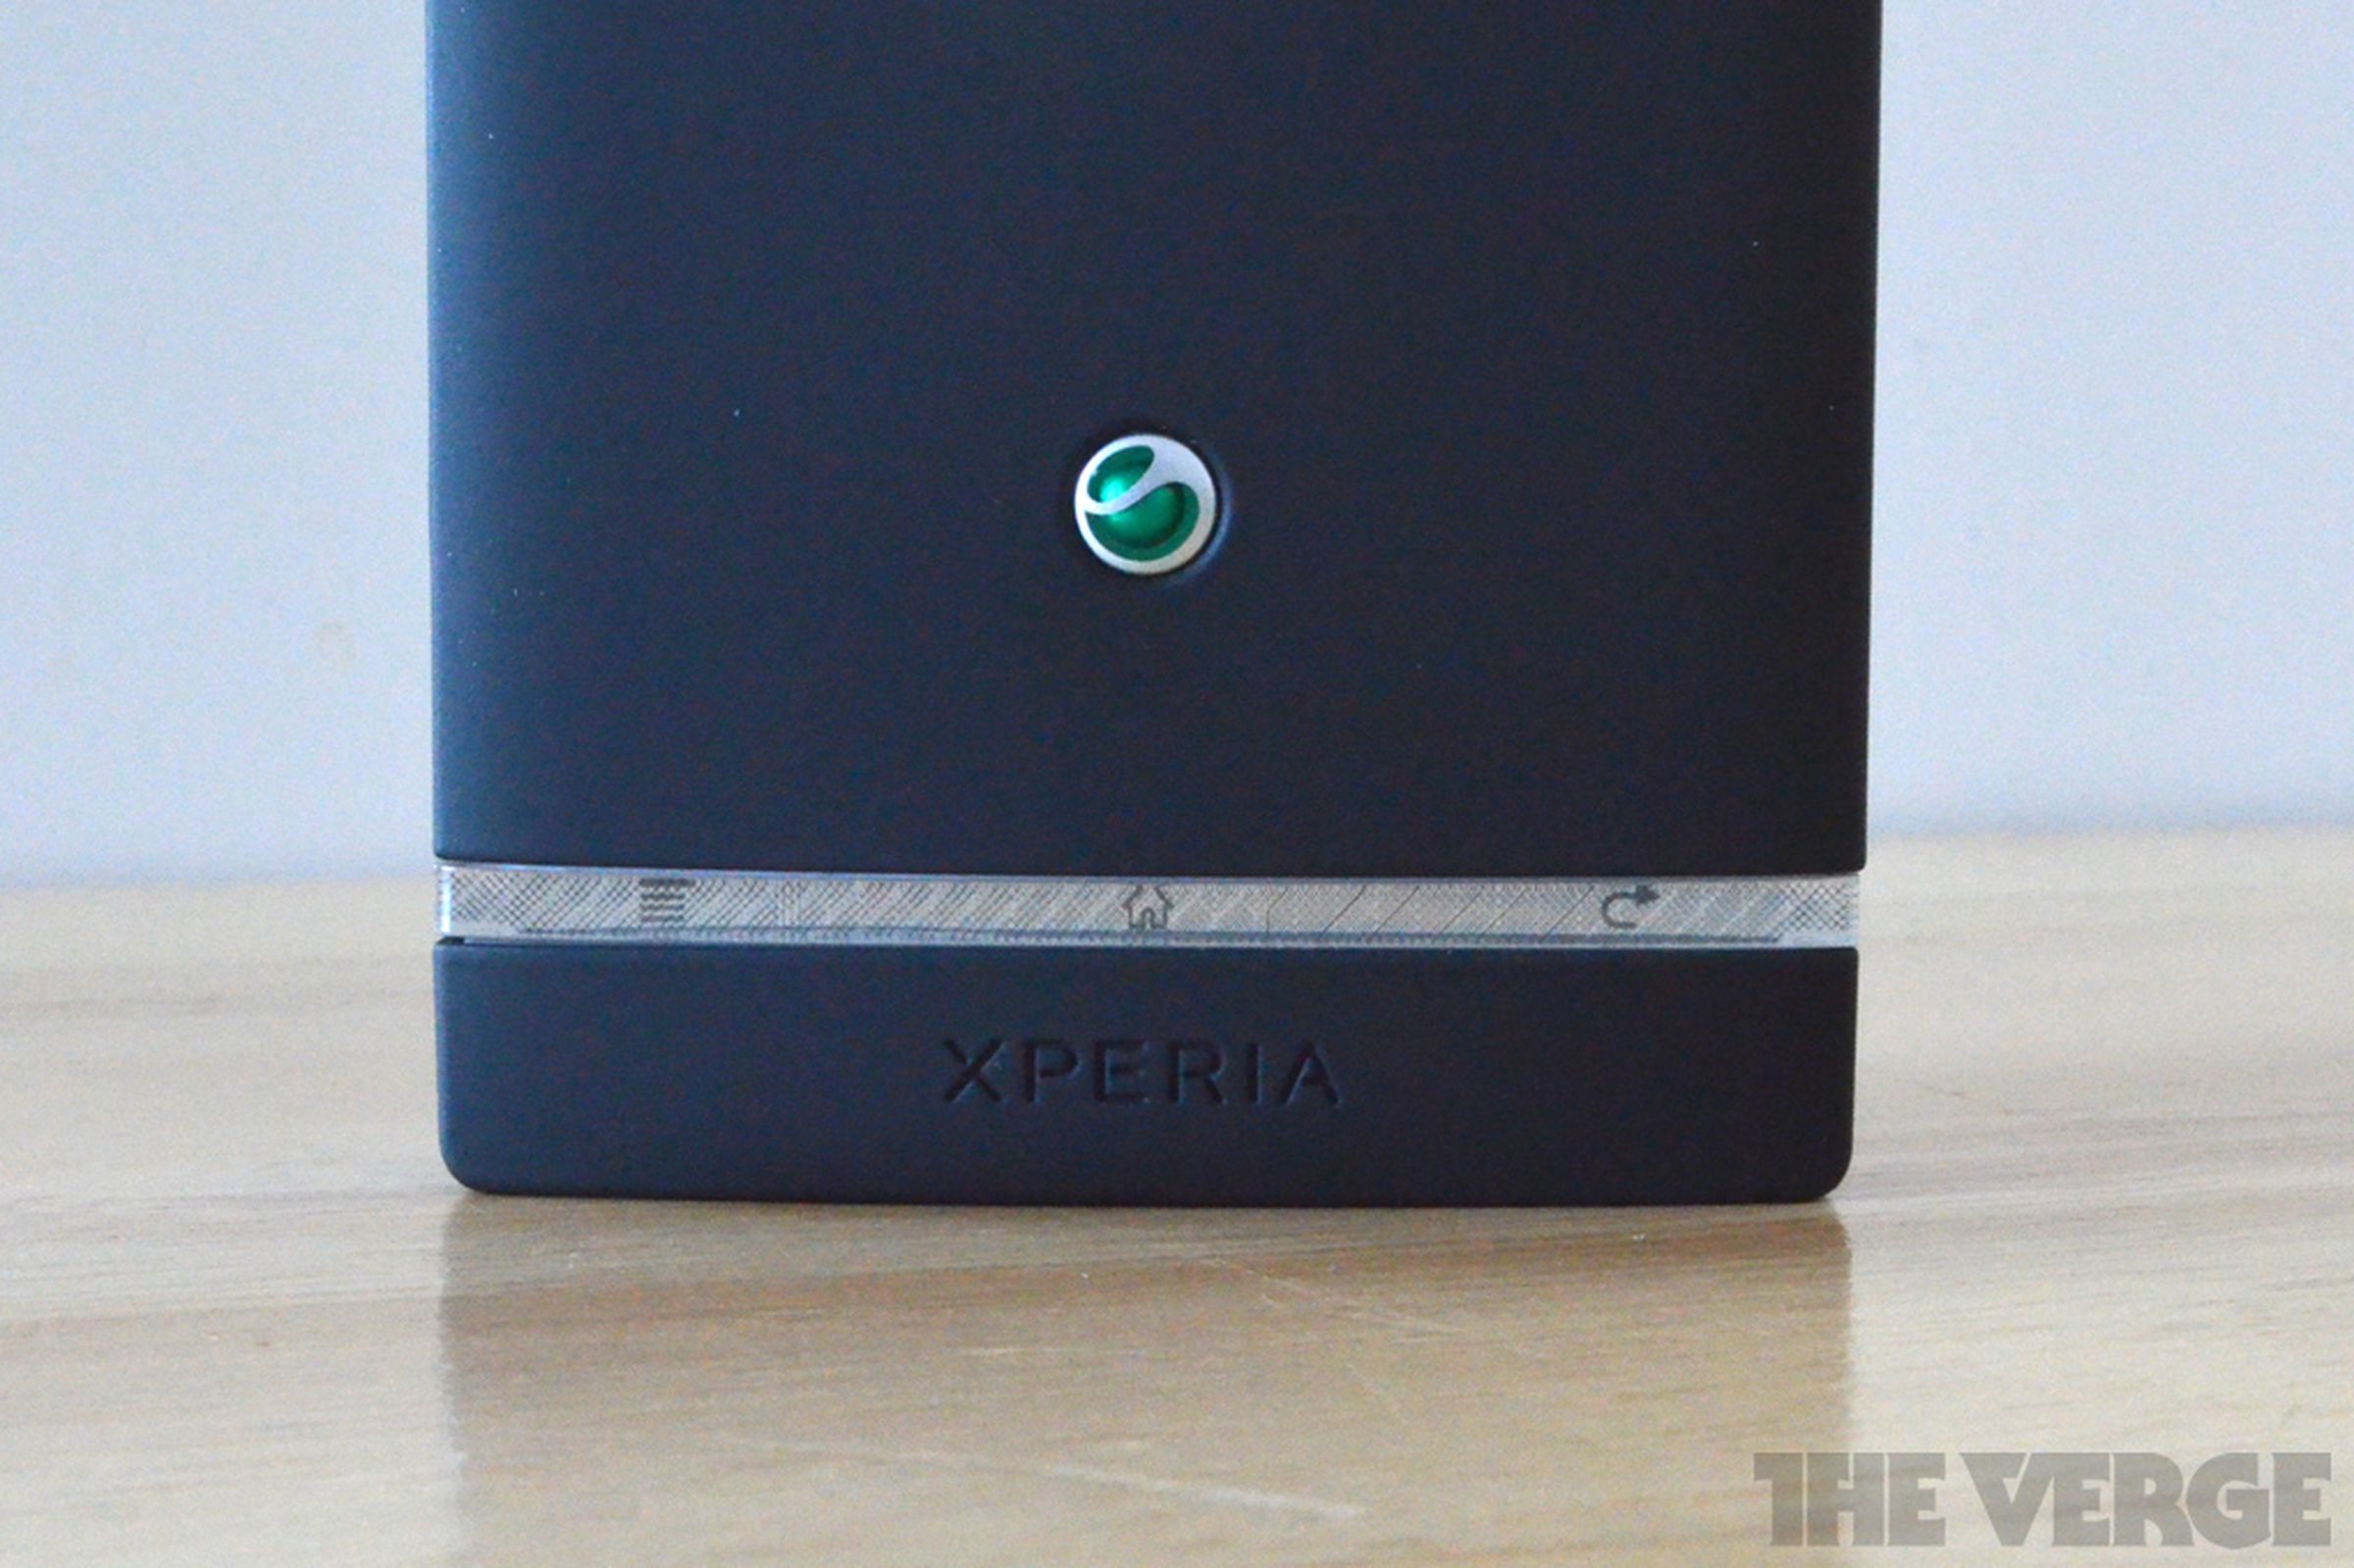 Sony Xperia U review pictures